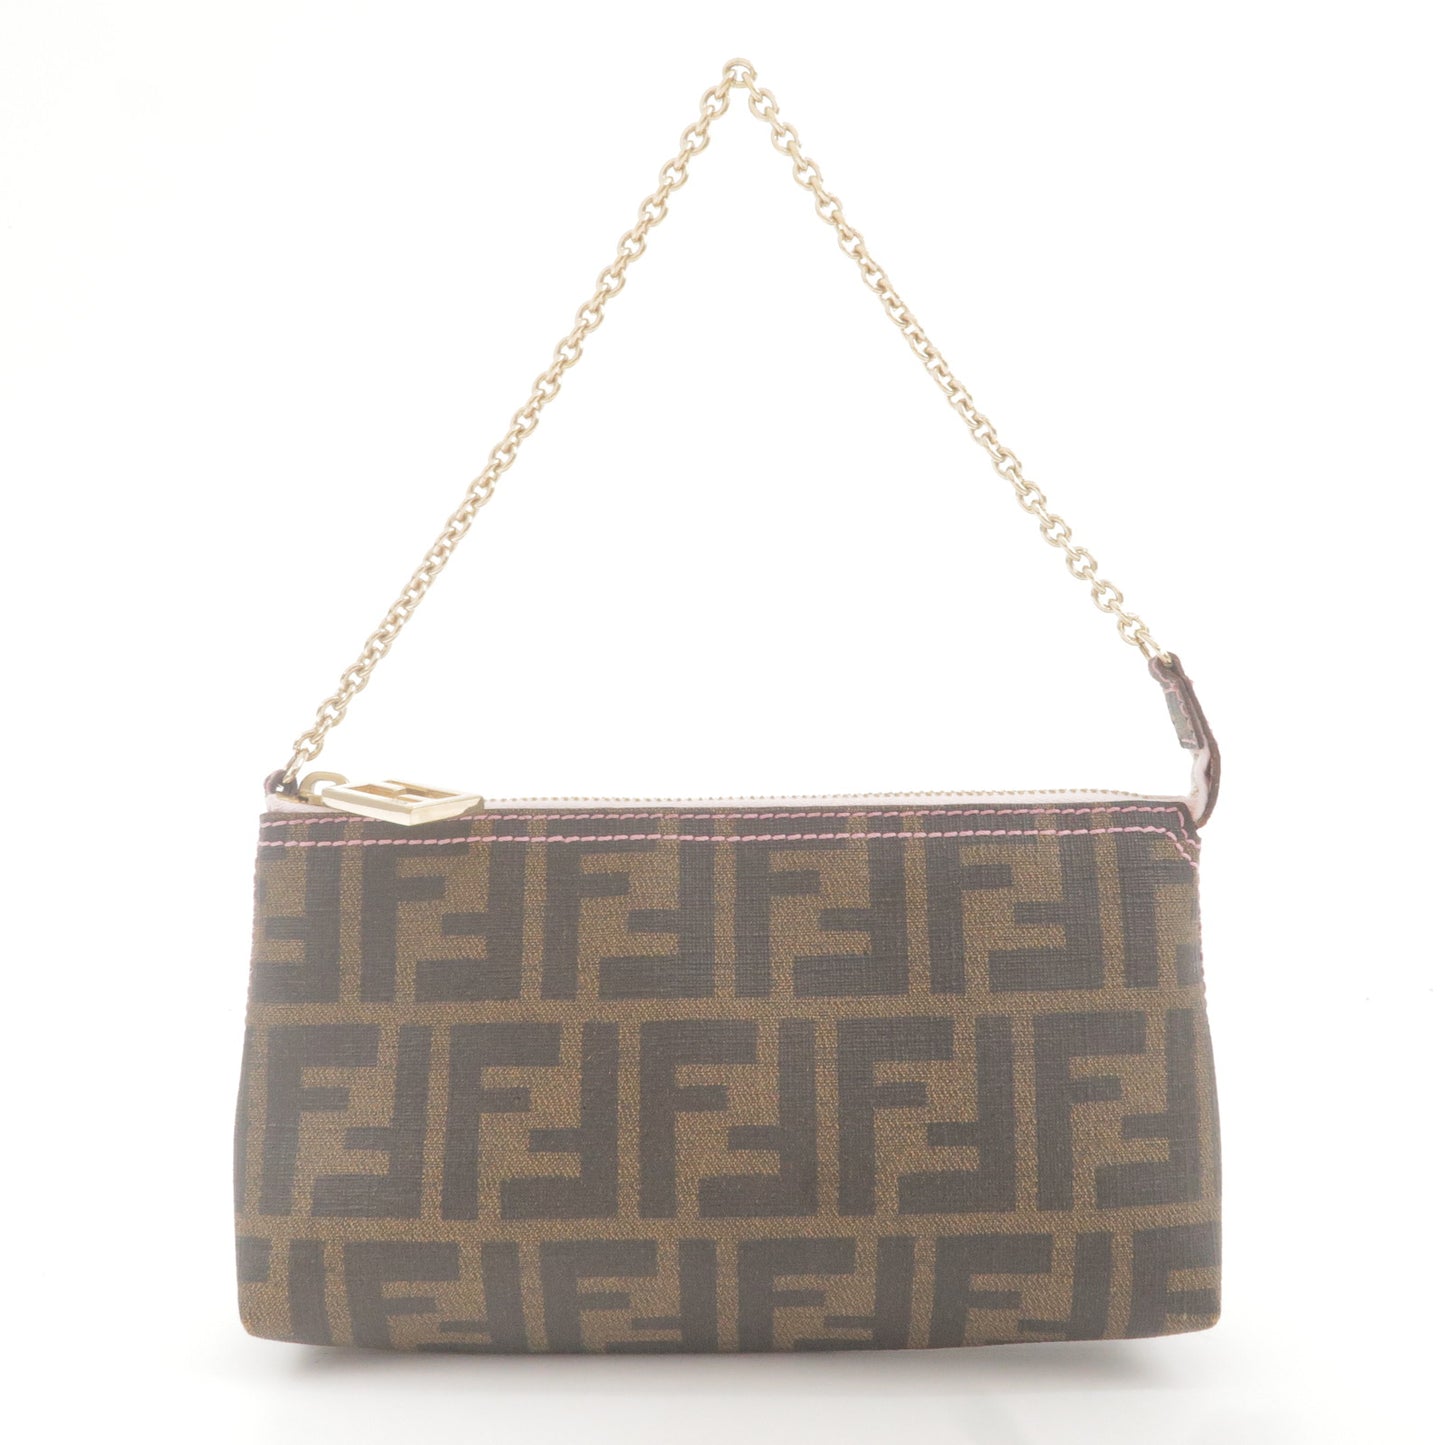 FENDI-Zucca-Print-PVC-Leather-Pouch-Hand-Bag-Brown-8BR592 – dct-ep_vintage  luxury Store